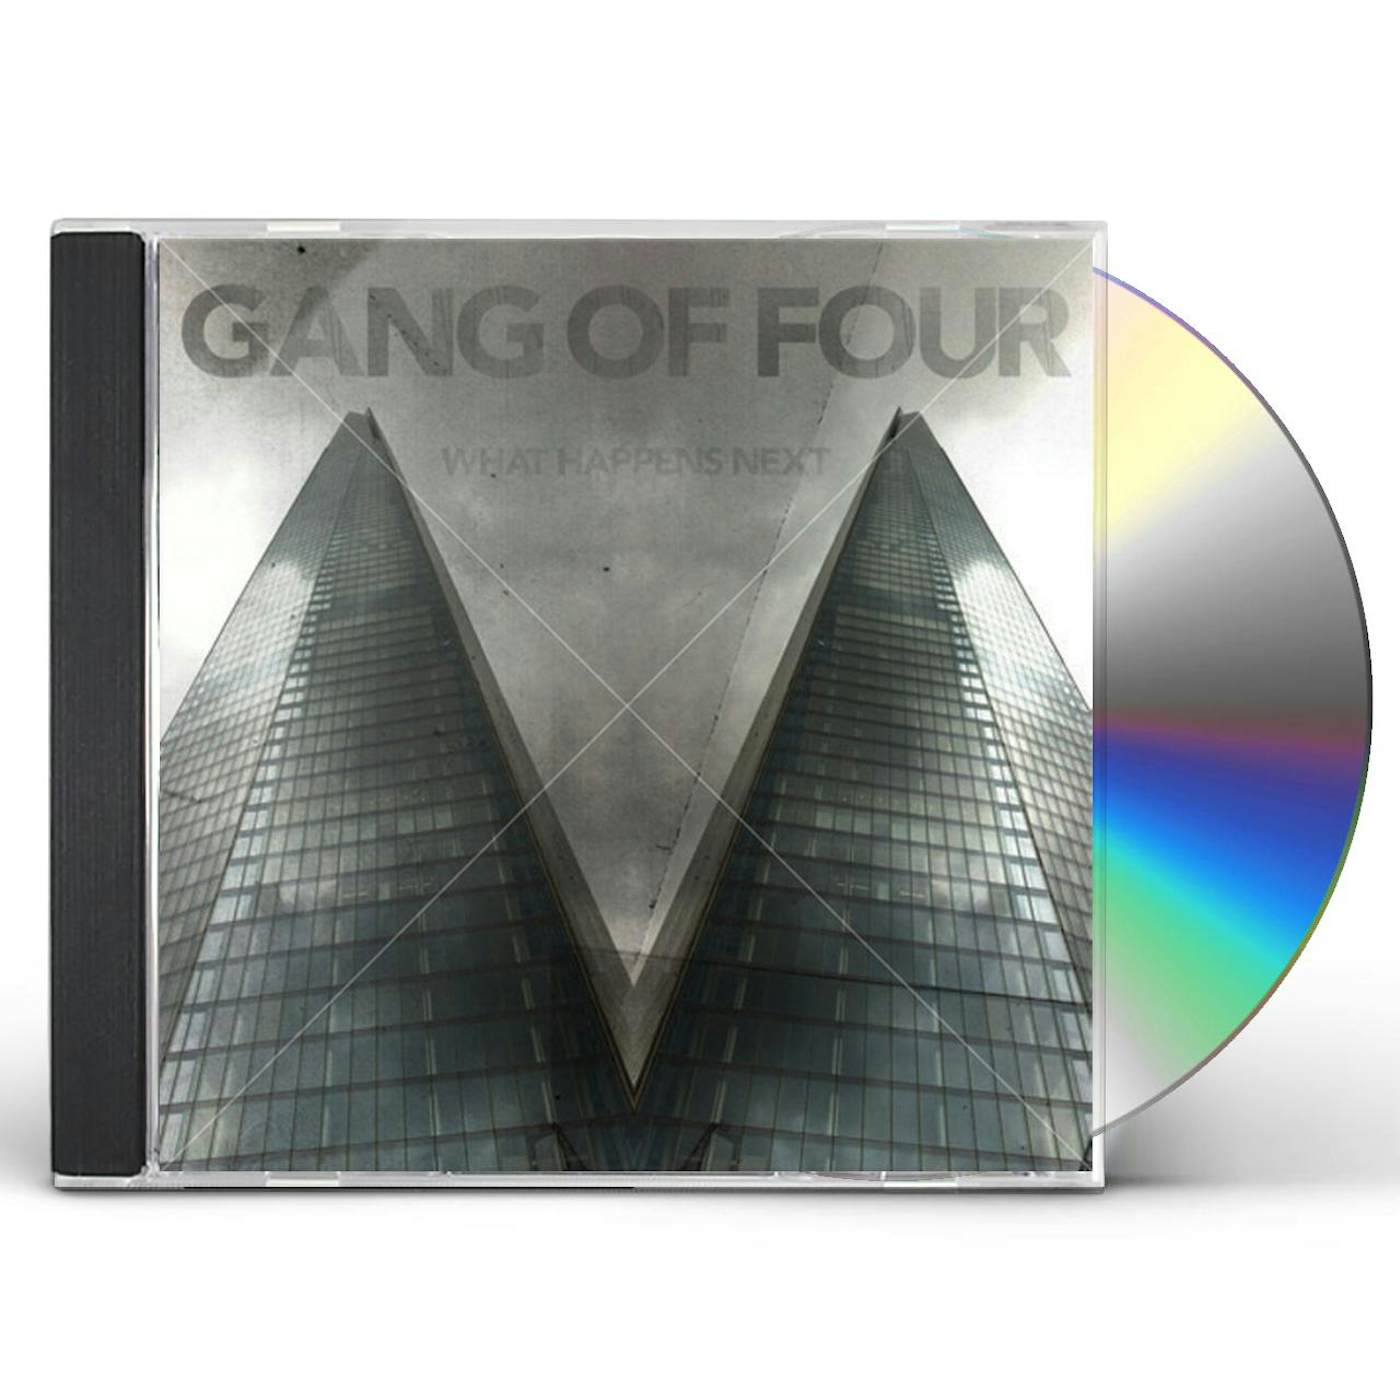 Gang Of Four WHAT HAPPENS NEXT CD